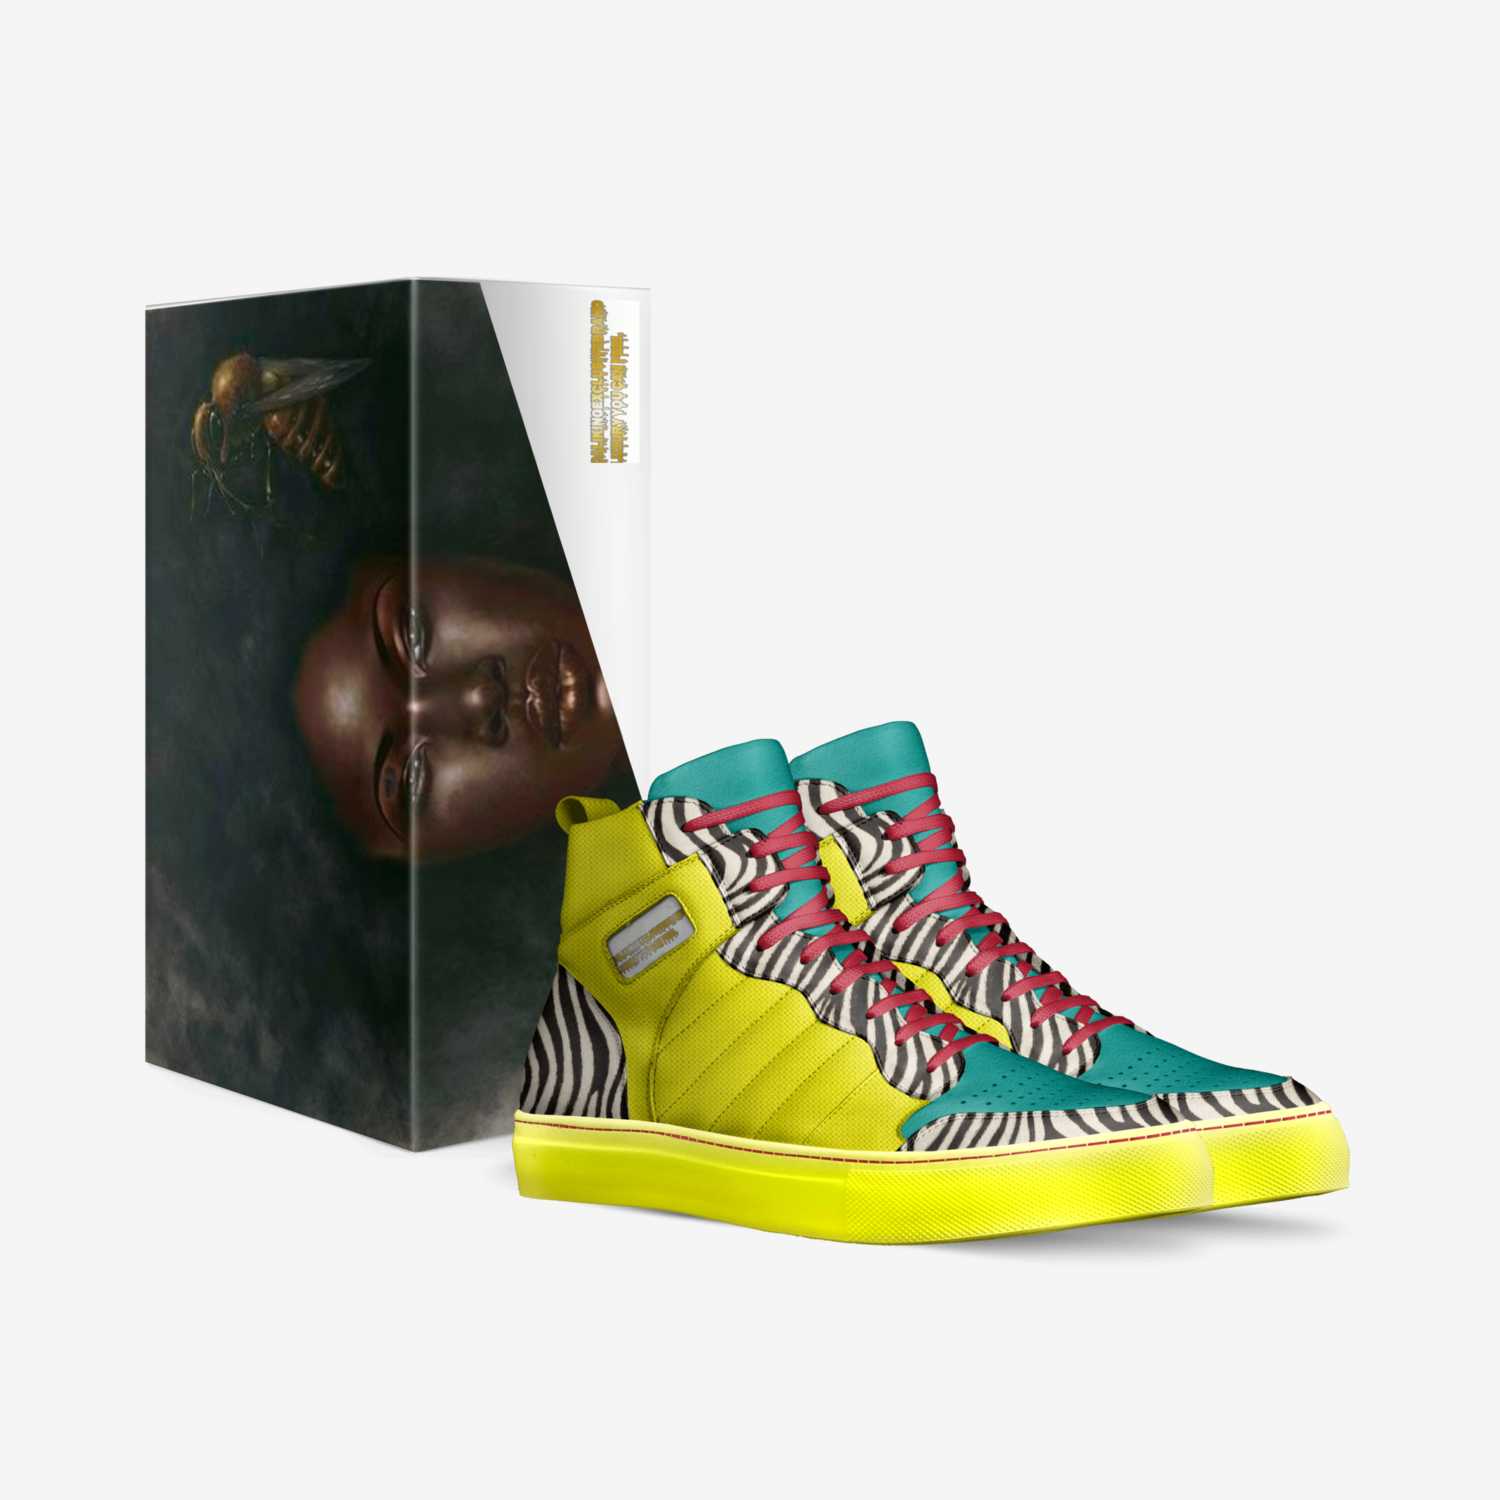 CKECOLORWAVE custom made in Italy shoes by Cameron Mabins | Box view